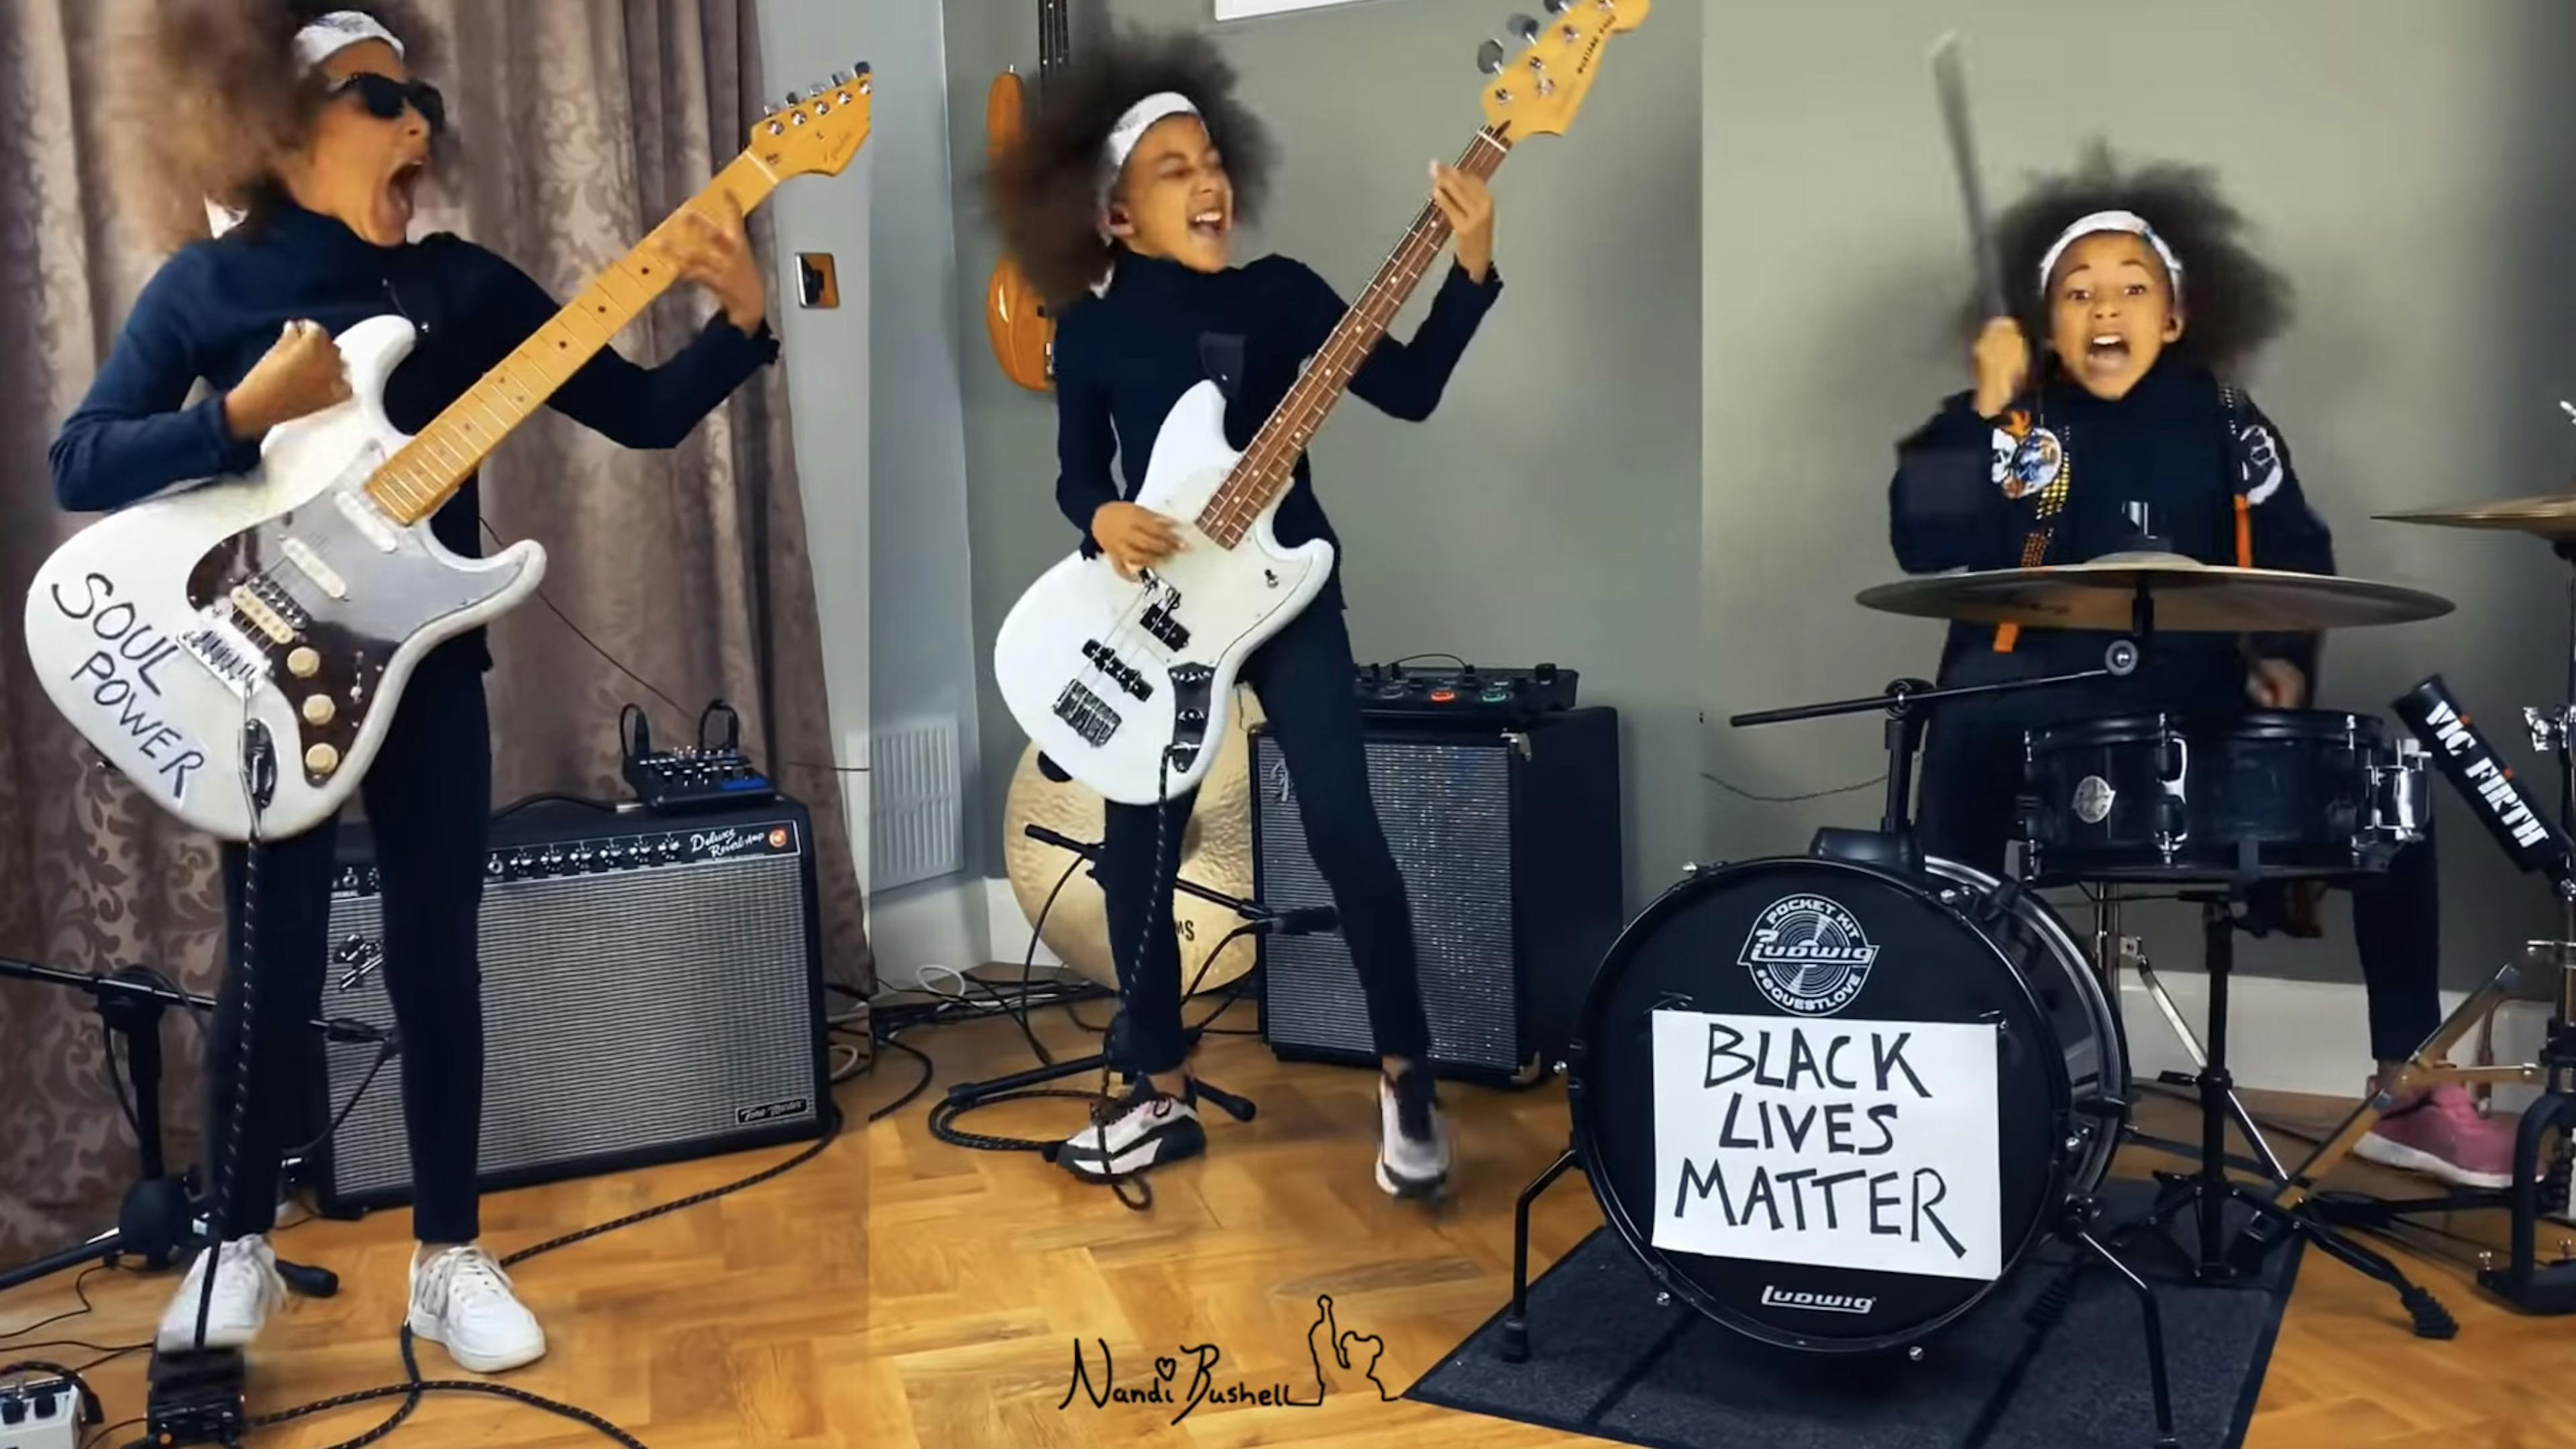 Watch This Awesome 10-Year-Old Cover Rage Against The Machine For Black Lives Matter